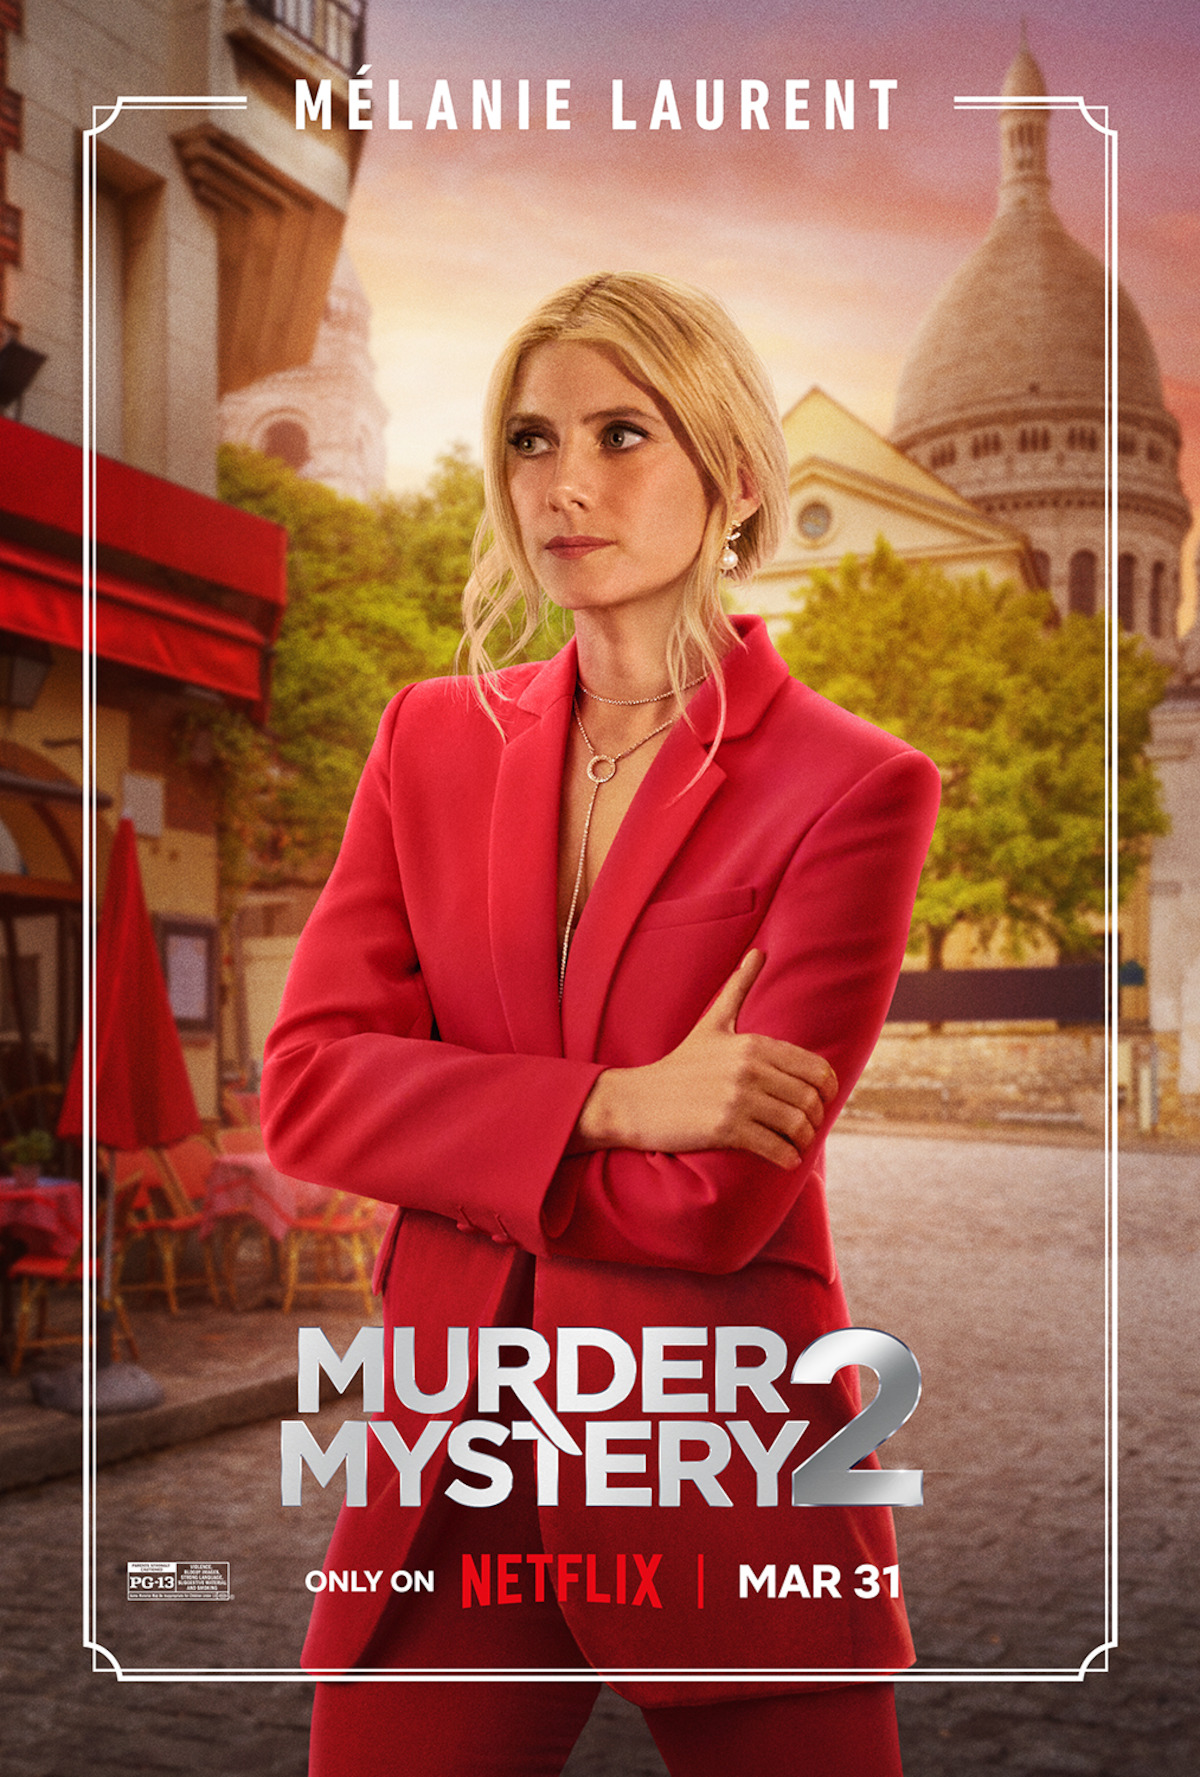 Murder Mystery 3: Will It Happen? Everything We Know